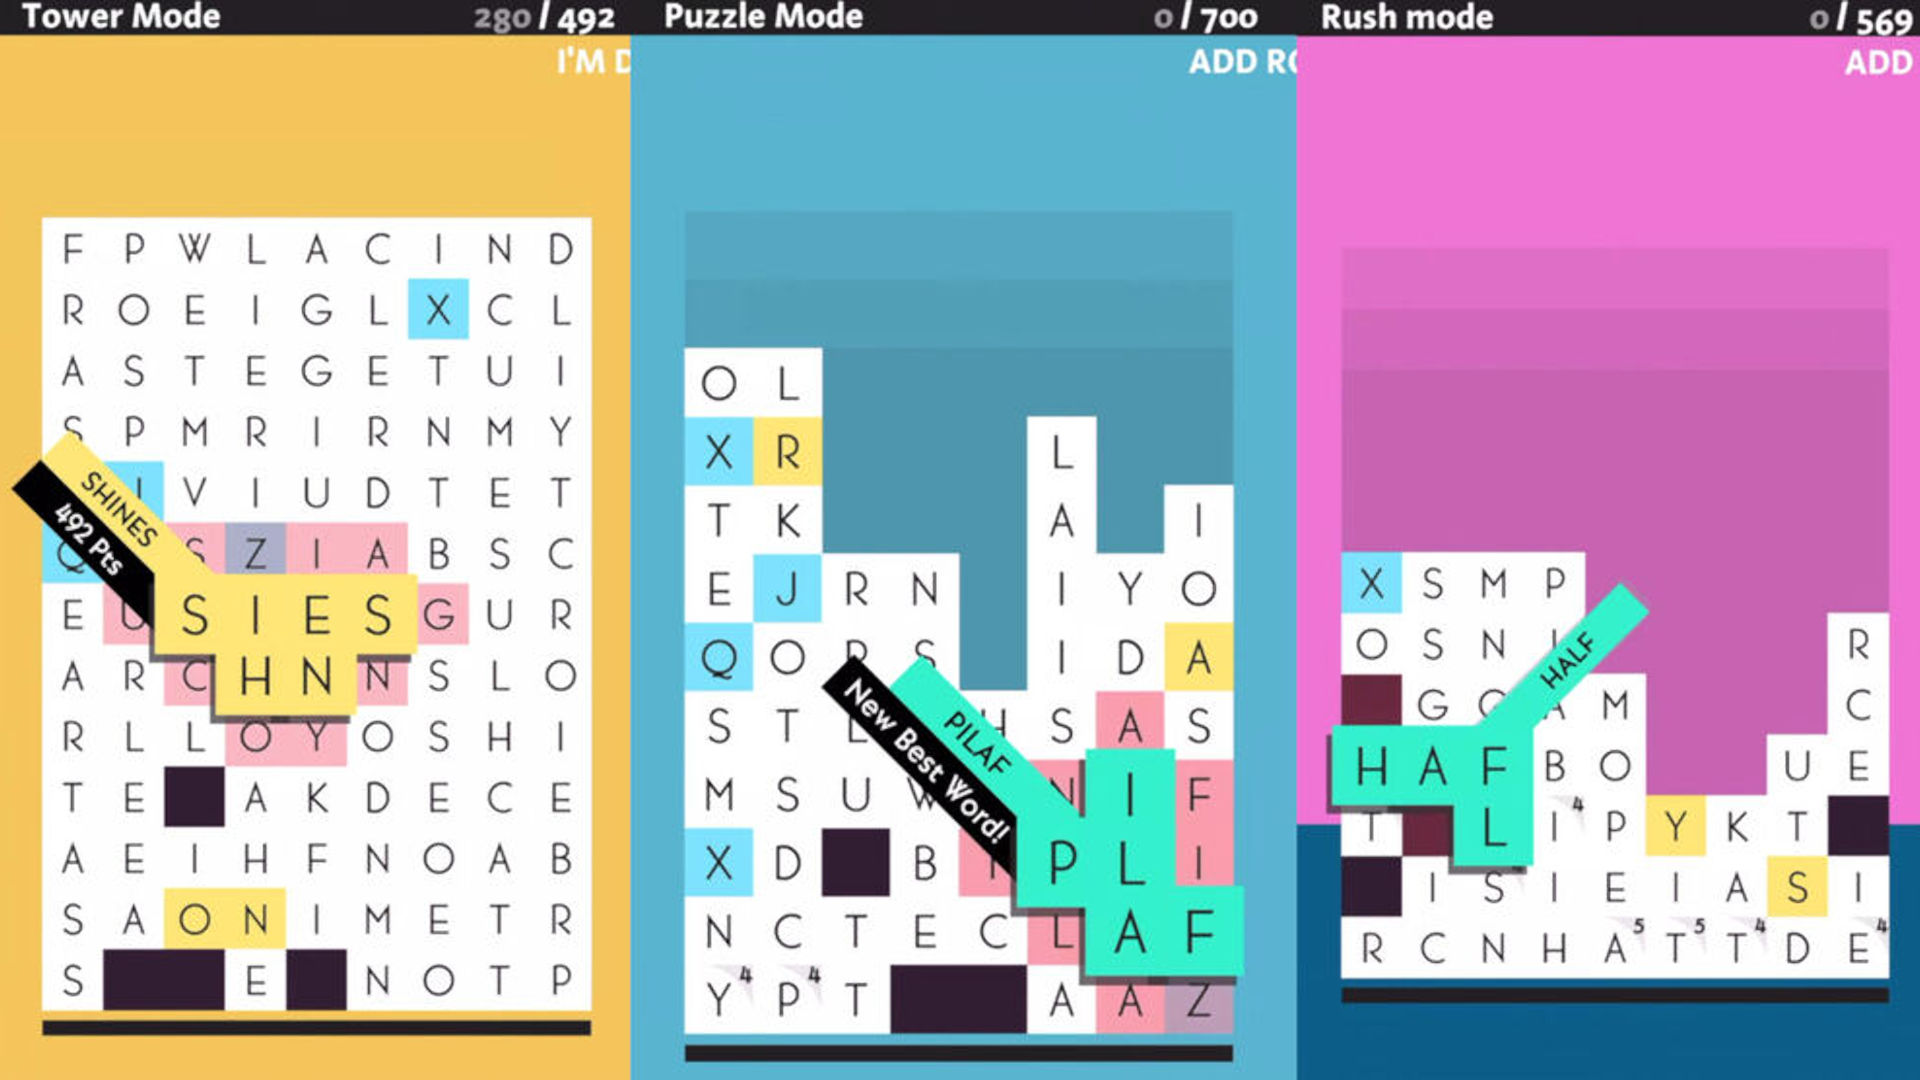 Wordle game alternatives: These 4 word puzzle games offer a twist